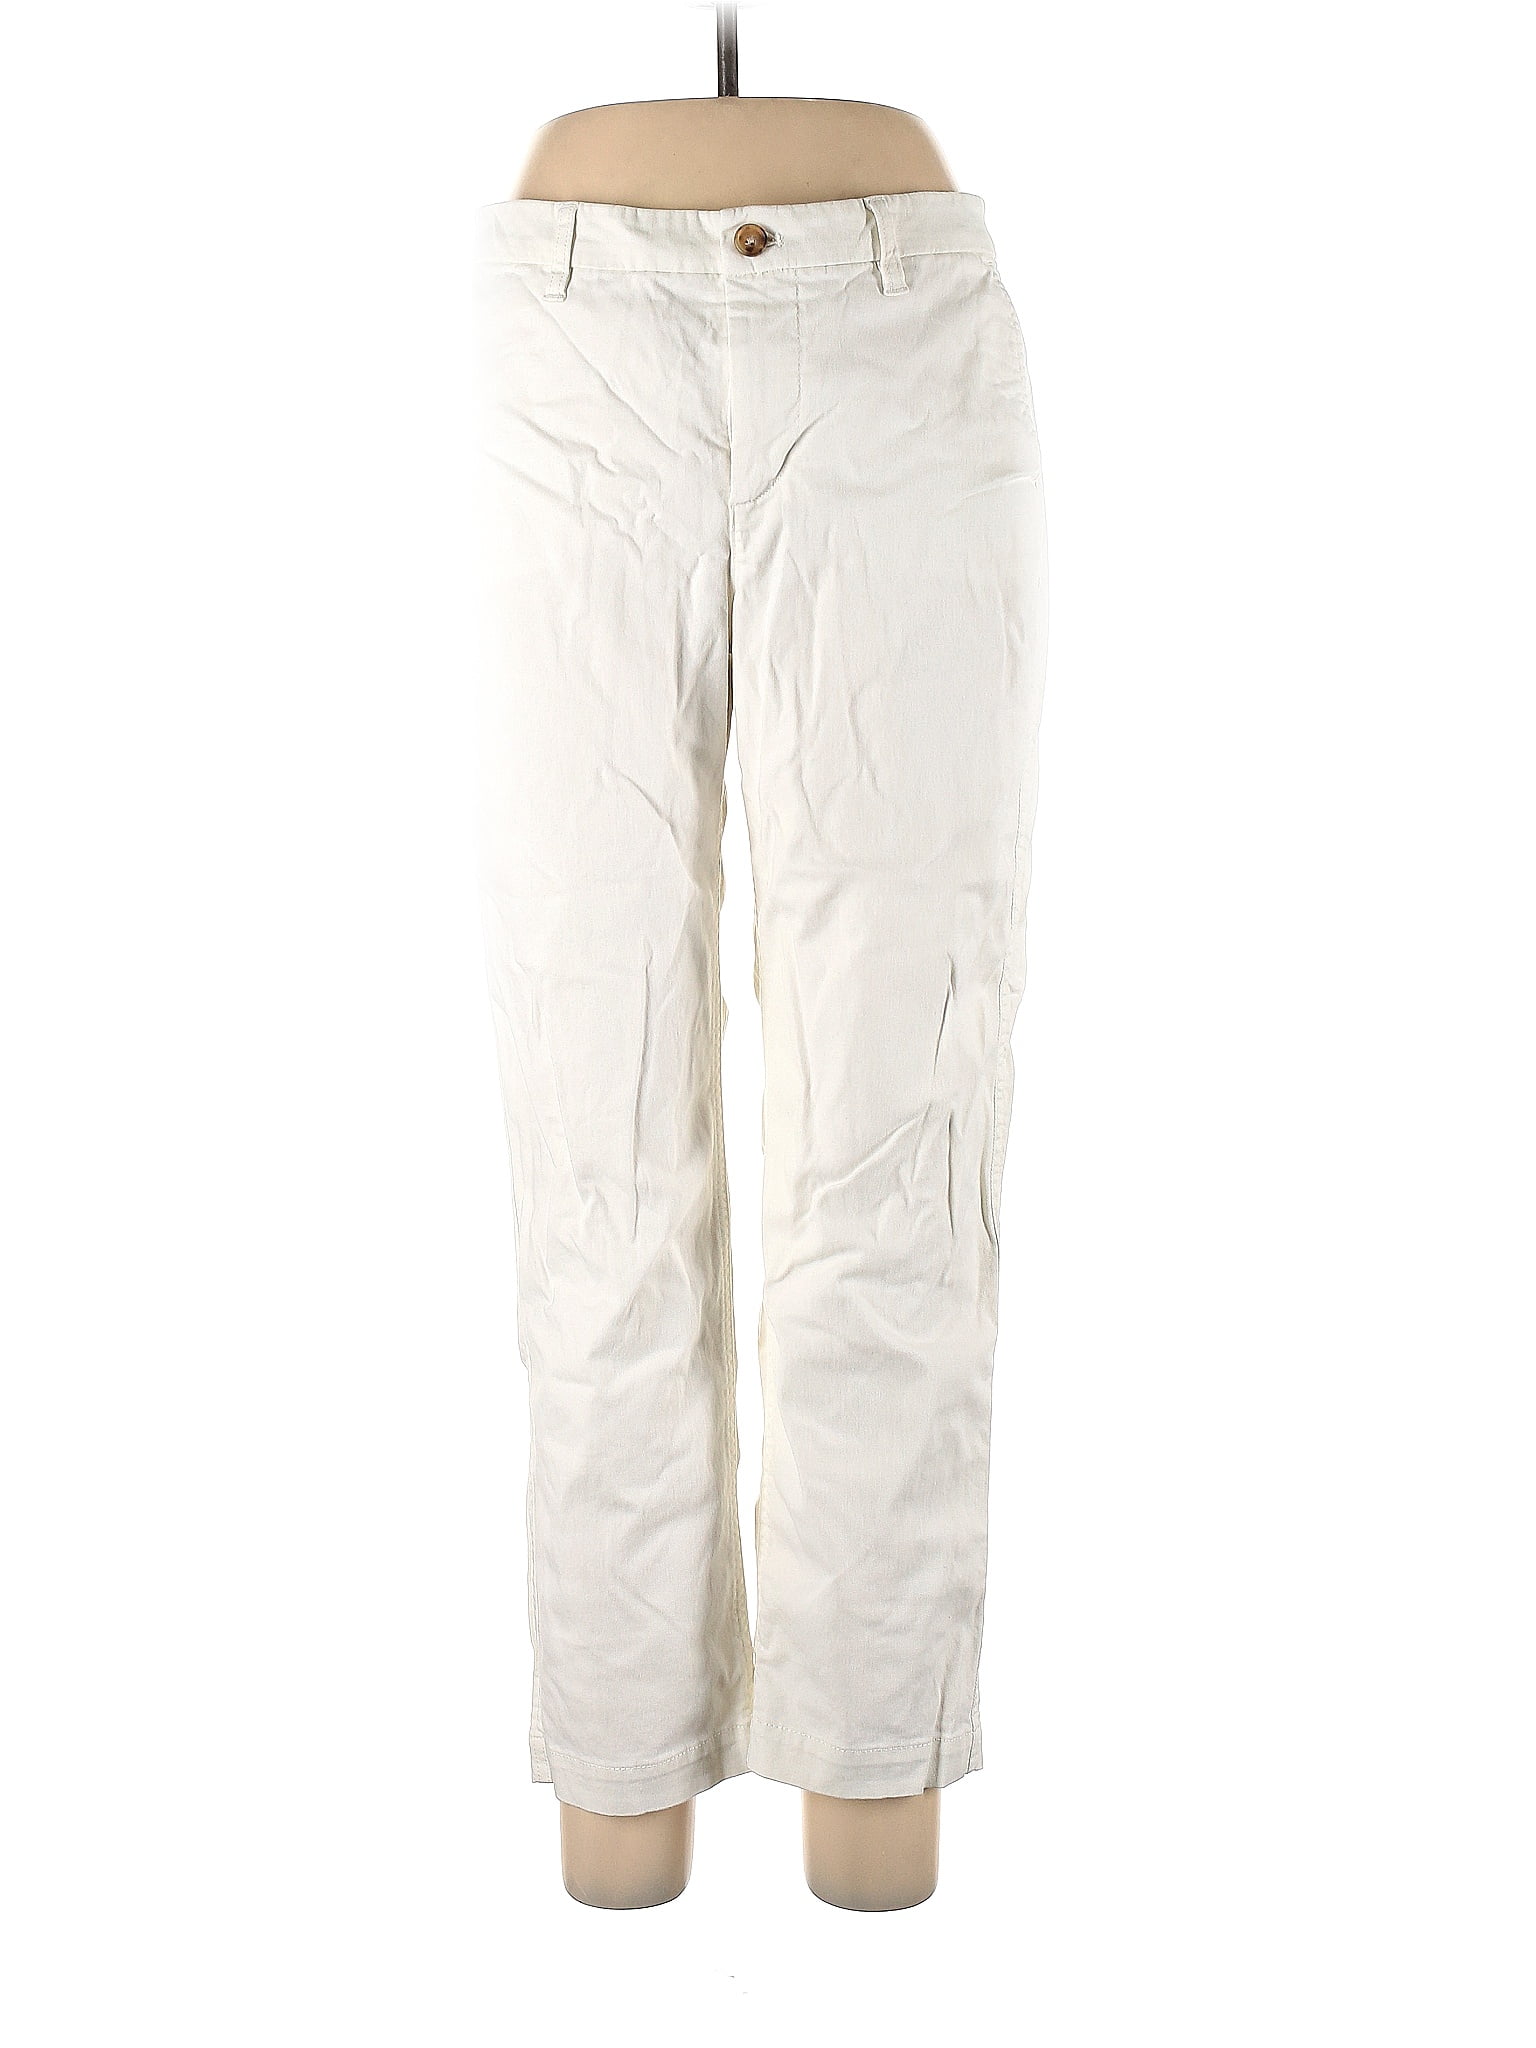 J.Crew Factory Store Solid White Ivory Khakis Size 10 - 86% off | thredUP